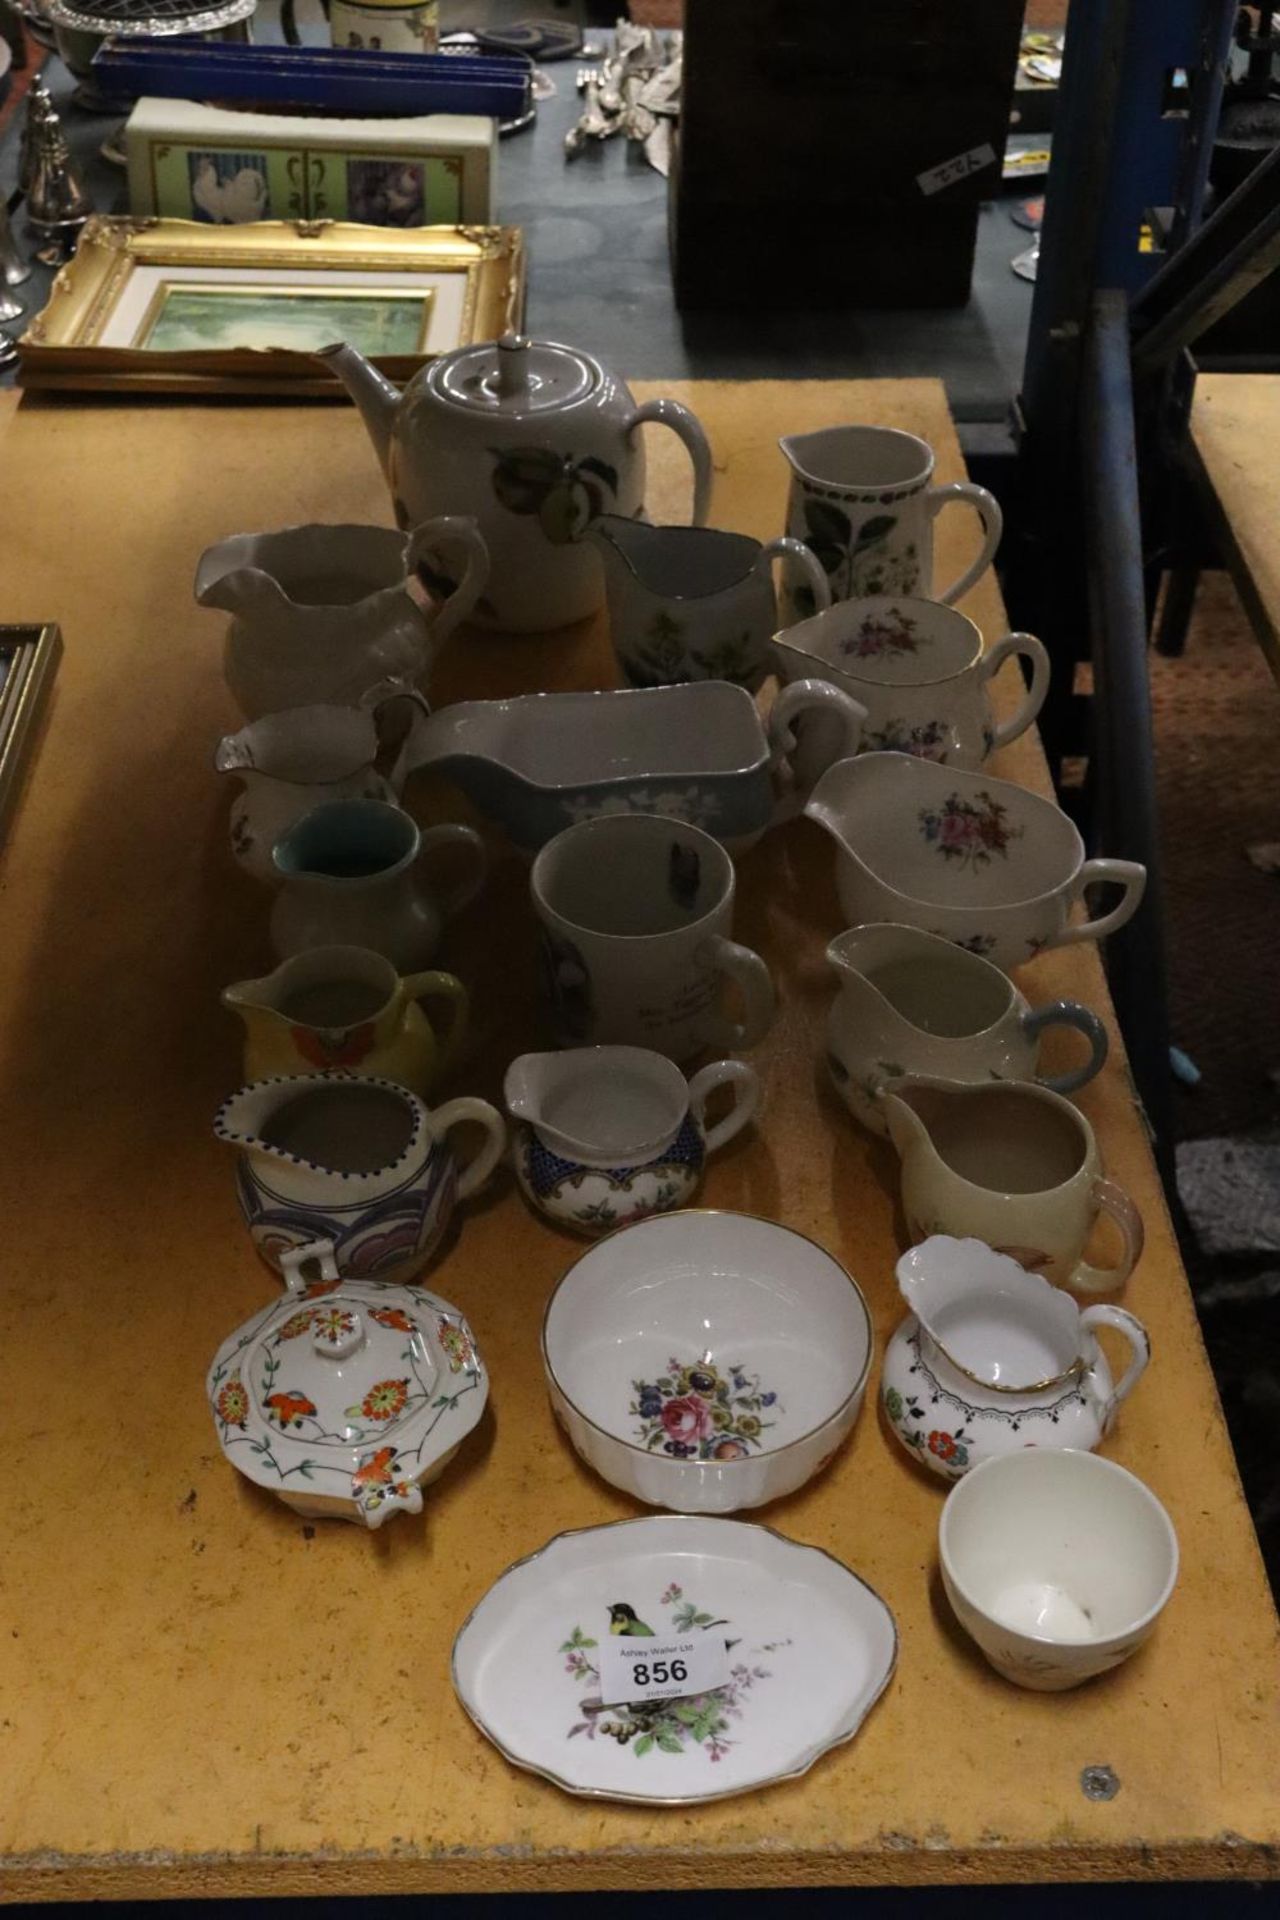 A LARGE COLLECTION OF CHINA AND CERAMIC JUGS TO INCLUDE ROYAL WORCESTER, SUSIE COOPER, AYNSLEY,